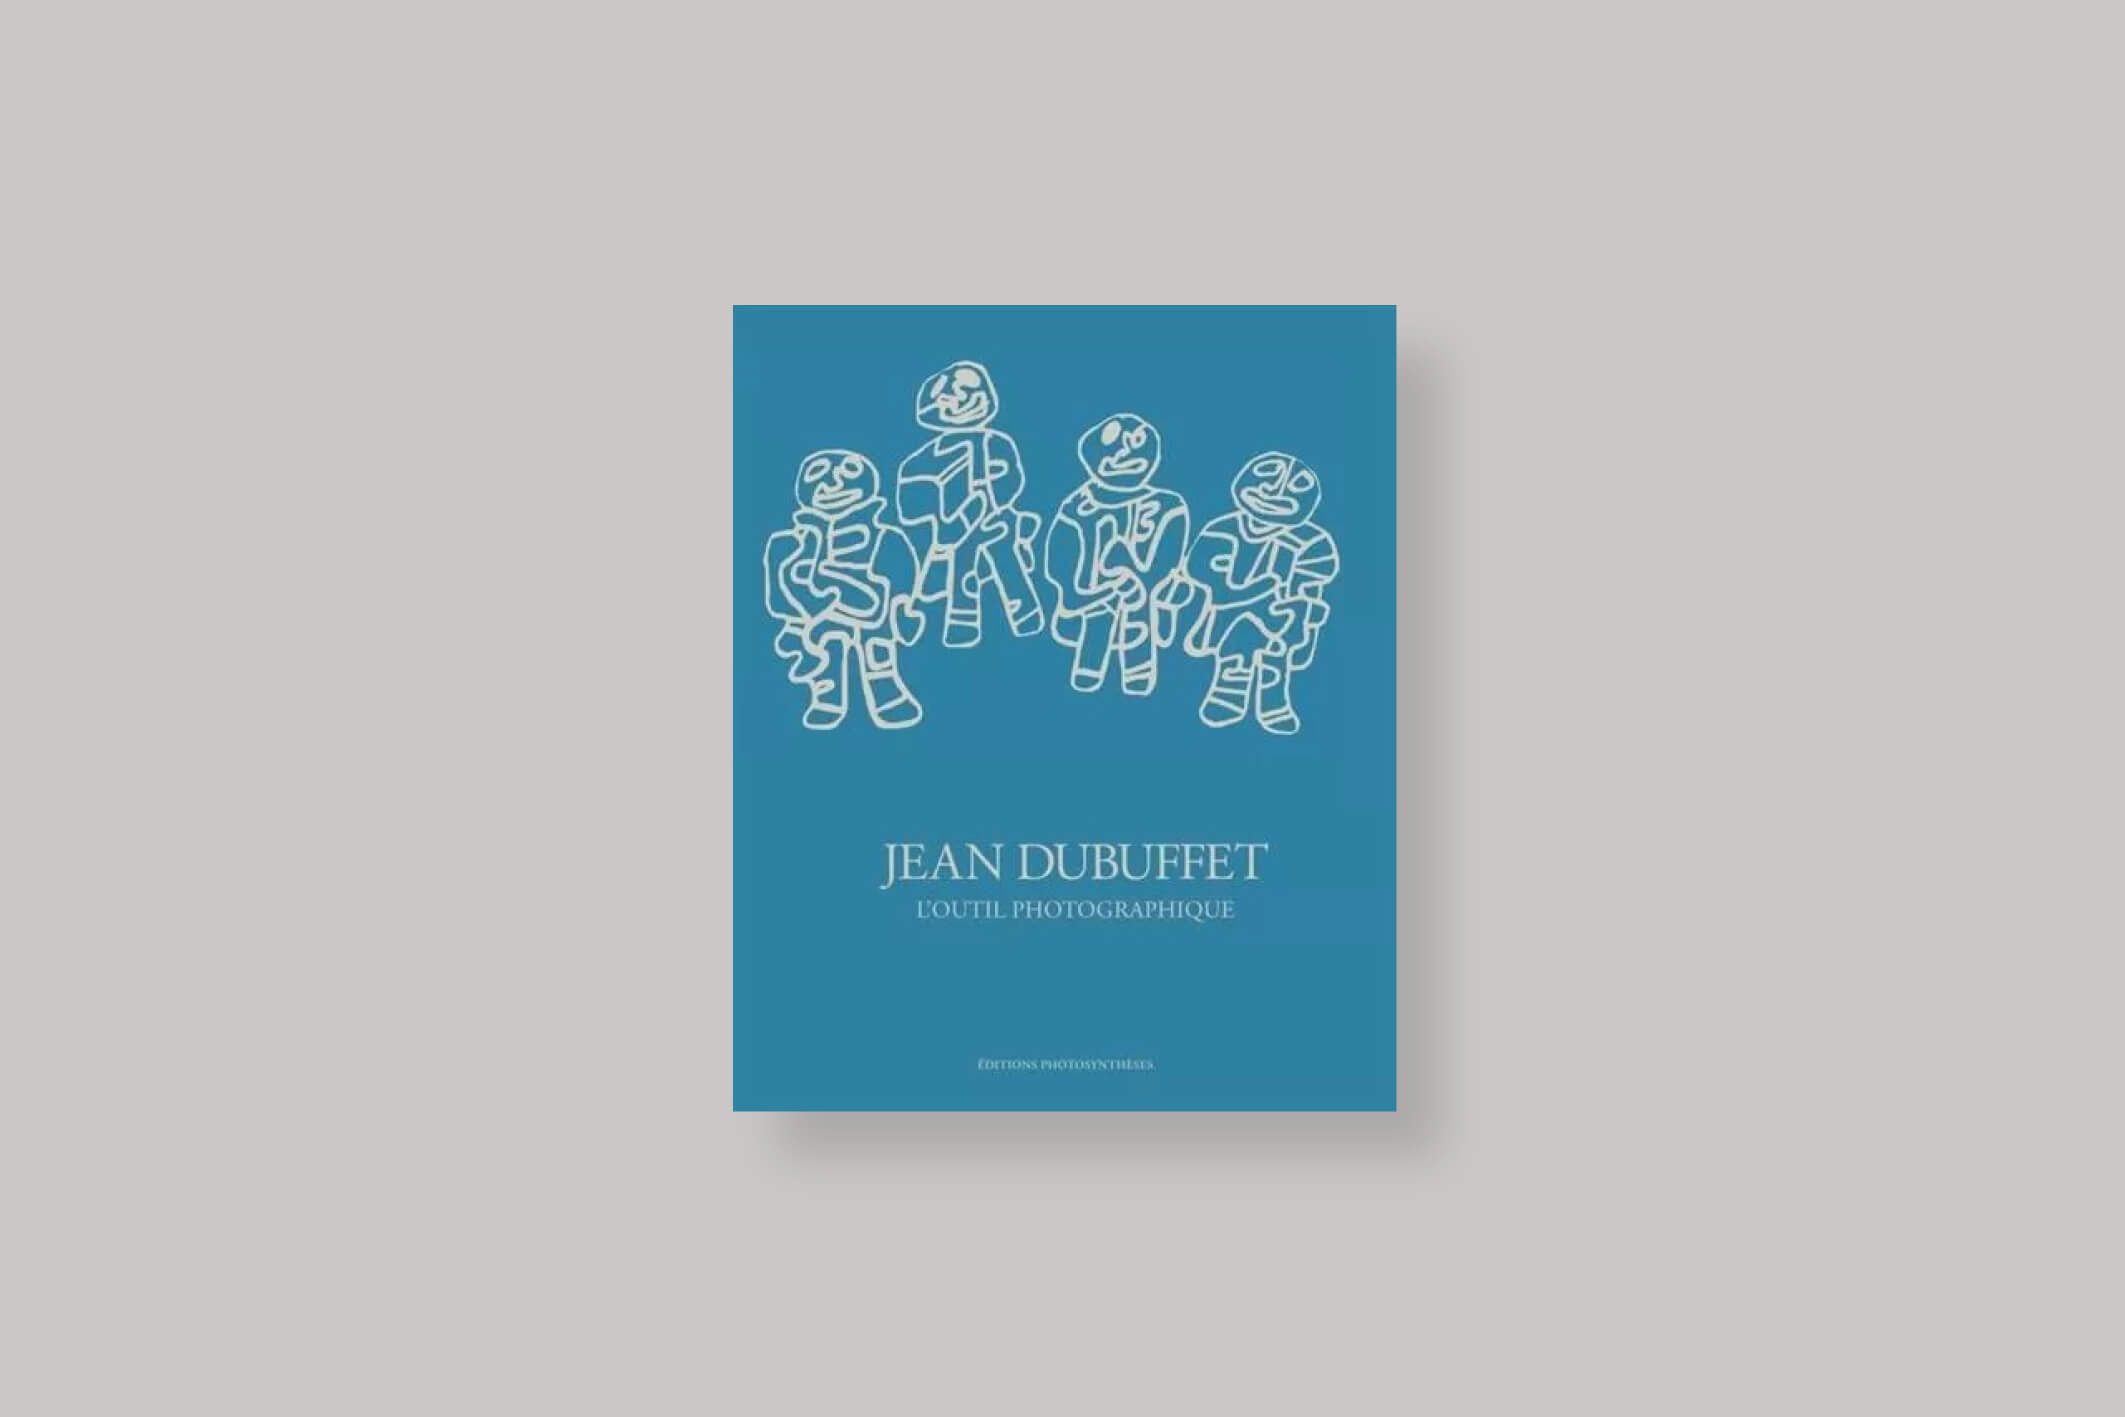 outil-photographique-jean-dubuffet-editions-photosyntheses-cover